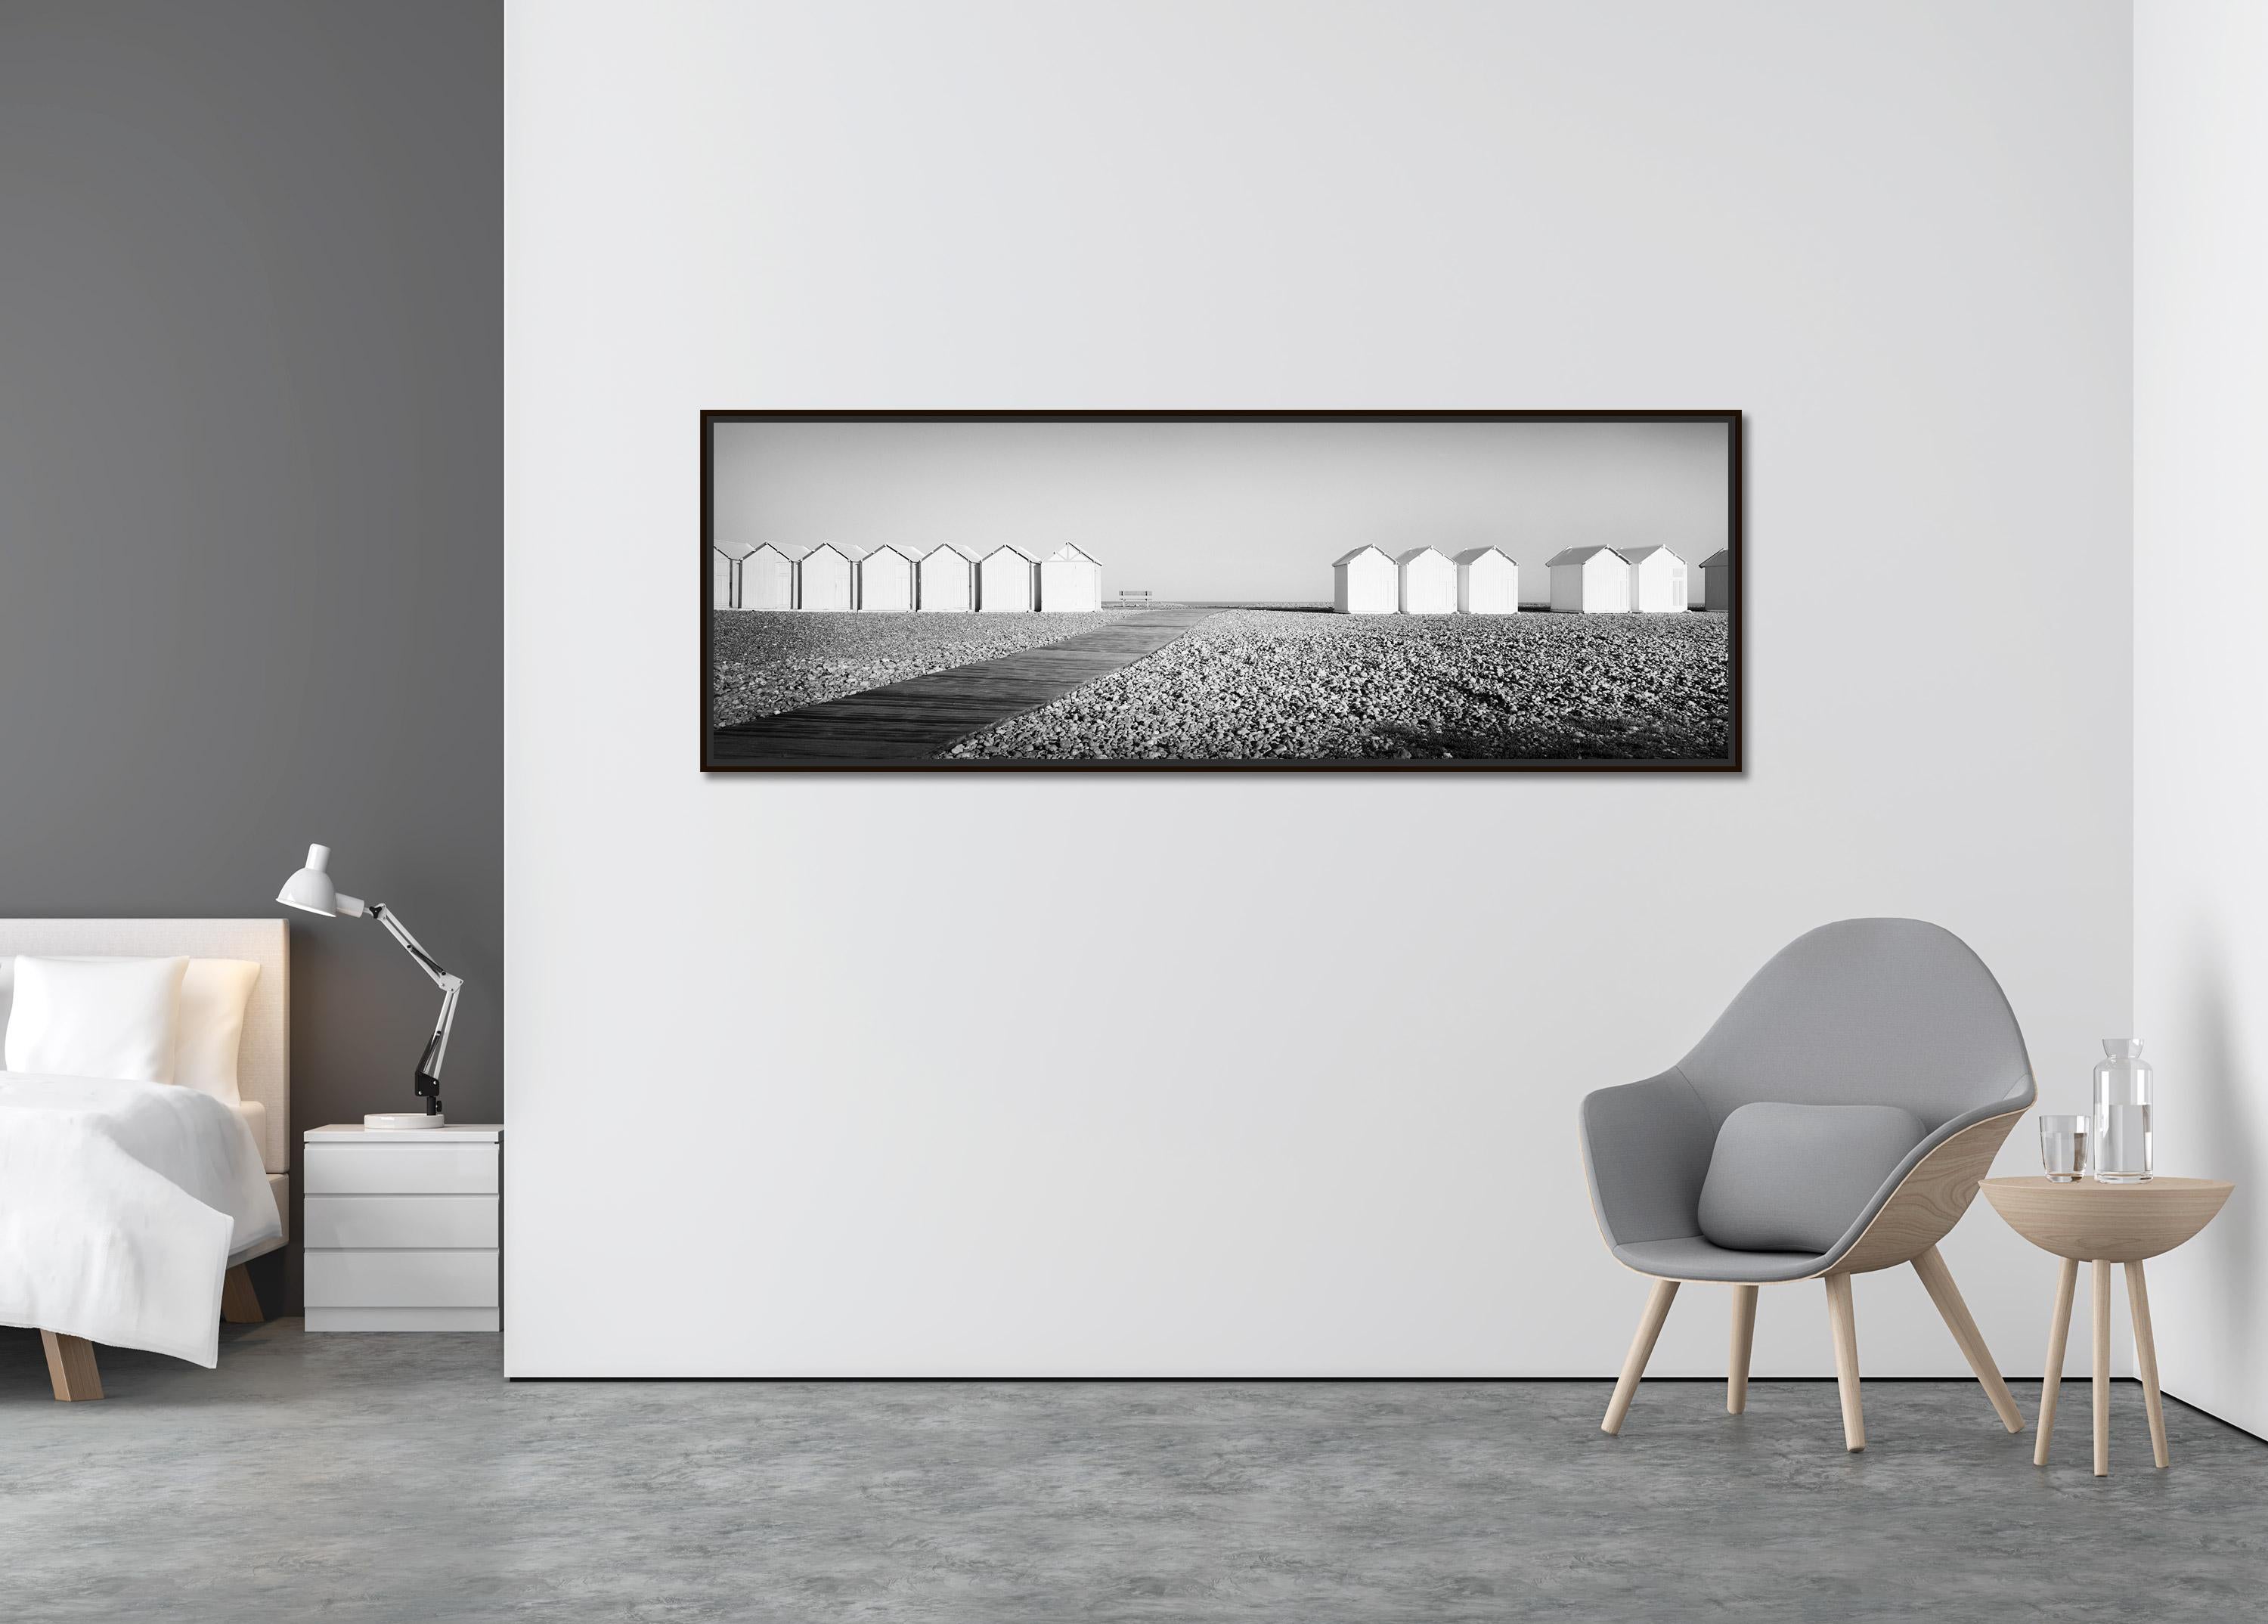 Beach Huts Panorama, bench, stones, France, black & white landscape photography - Contemporary Photograph by Gerald Berghammer